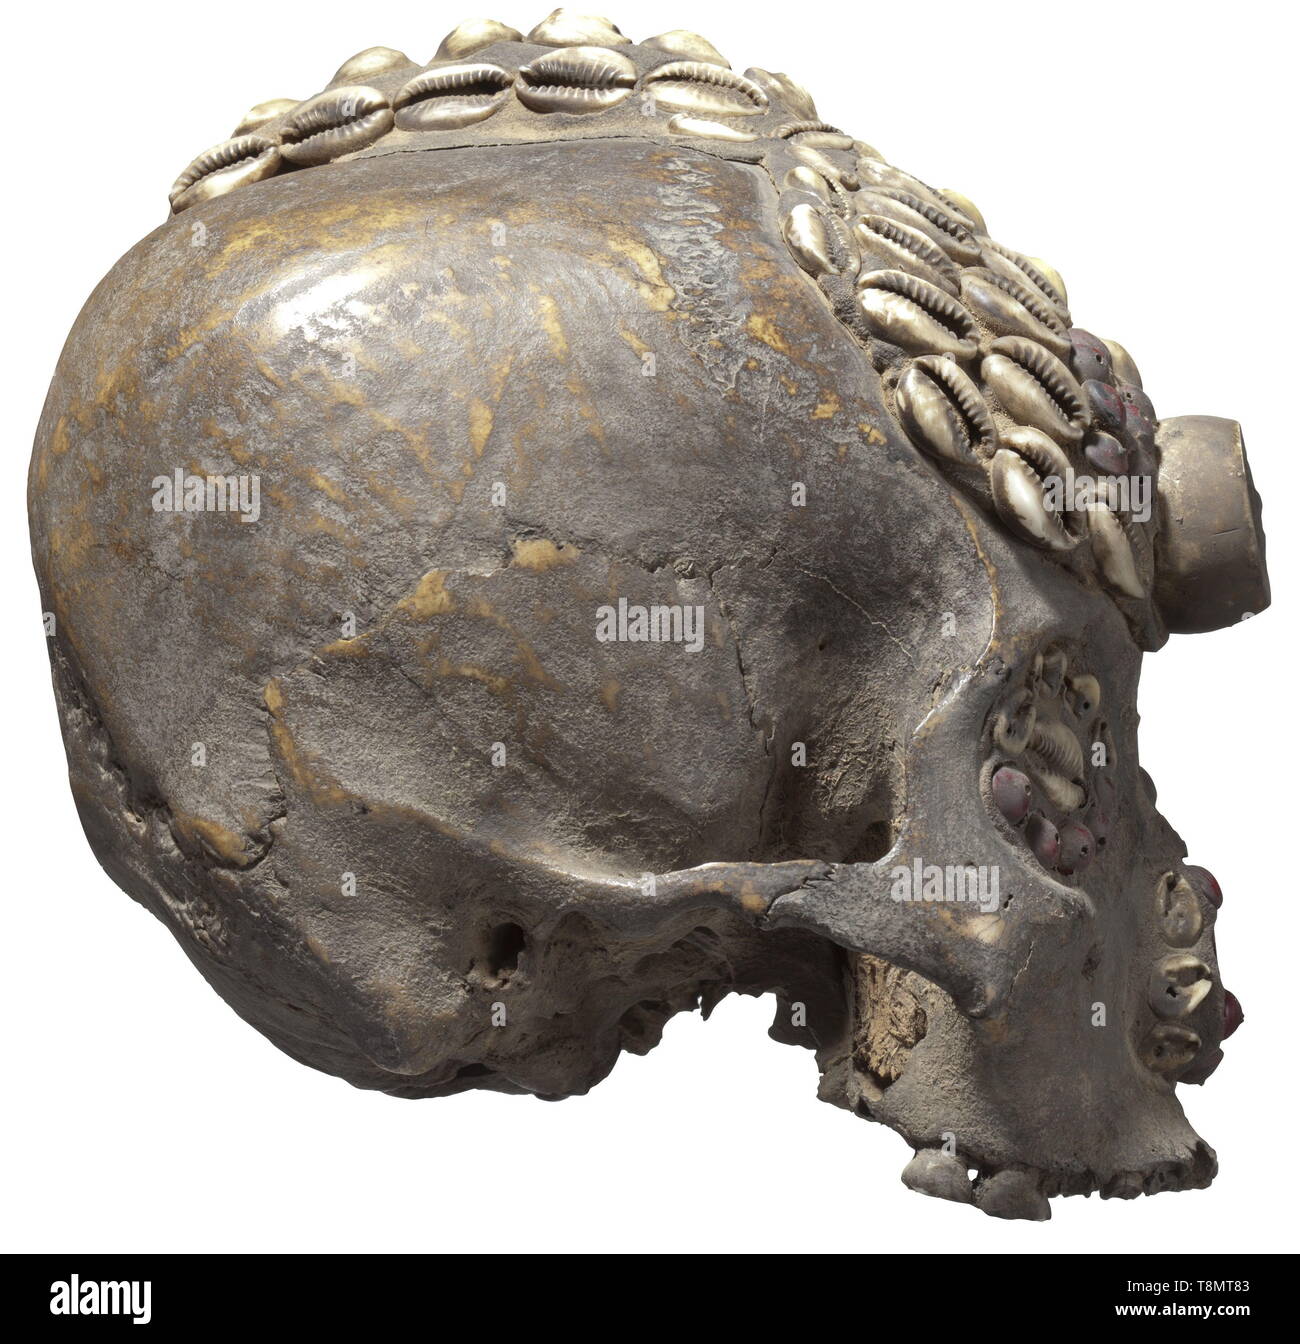 A Papua New Guinean ancestor's skull Human skull without lower jaw, the eye sockets, nasal cavity, forehead and crown decorated with seeds and cowry shells. Surfaces patinated and with signs of age. Most of the teeth of the upper jaw missing. Height 16.5 cm. historic, historical, Indonesian archipelago, Indonesia, Far East, Asia, Asian, ethnology, ethnicity, ethnic, tribal, object, objects, stills, clipping, clippings, cut out, cut-out, cut-outs, Additional-Rights-Clearance-Info-Not-Available Stock Photo